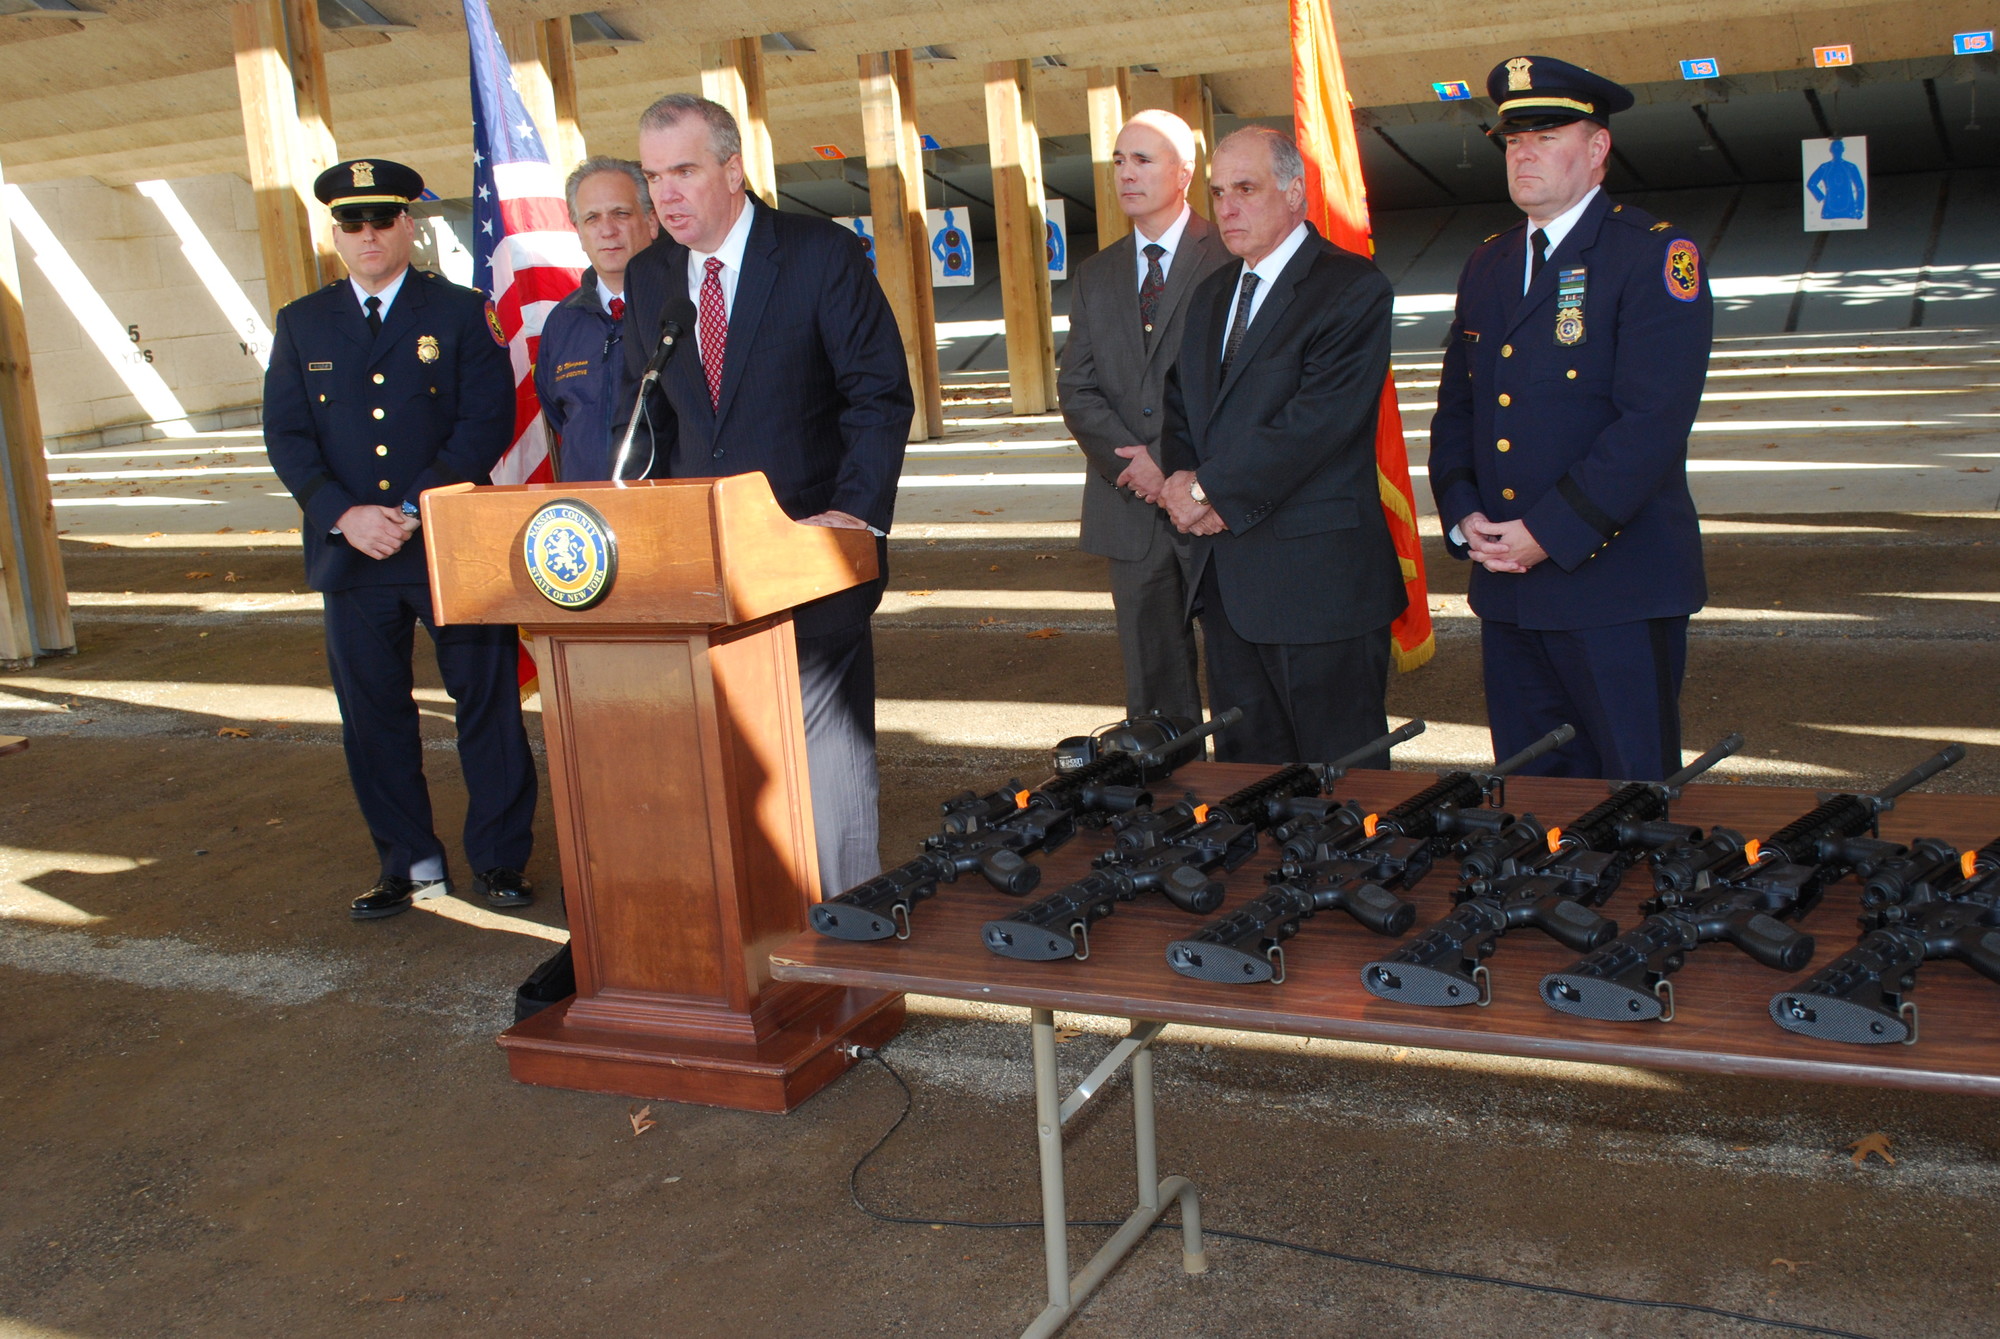 Acting Nassau County Police Commissioner Thomas Krumpter announced the purchase of 150 M400 squat rifles at a press conference last week.